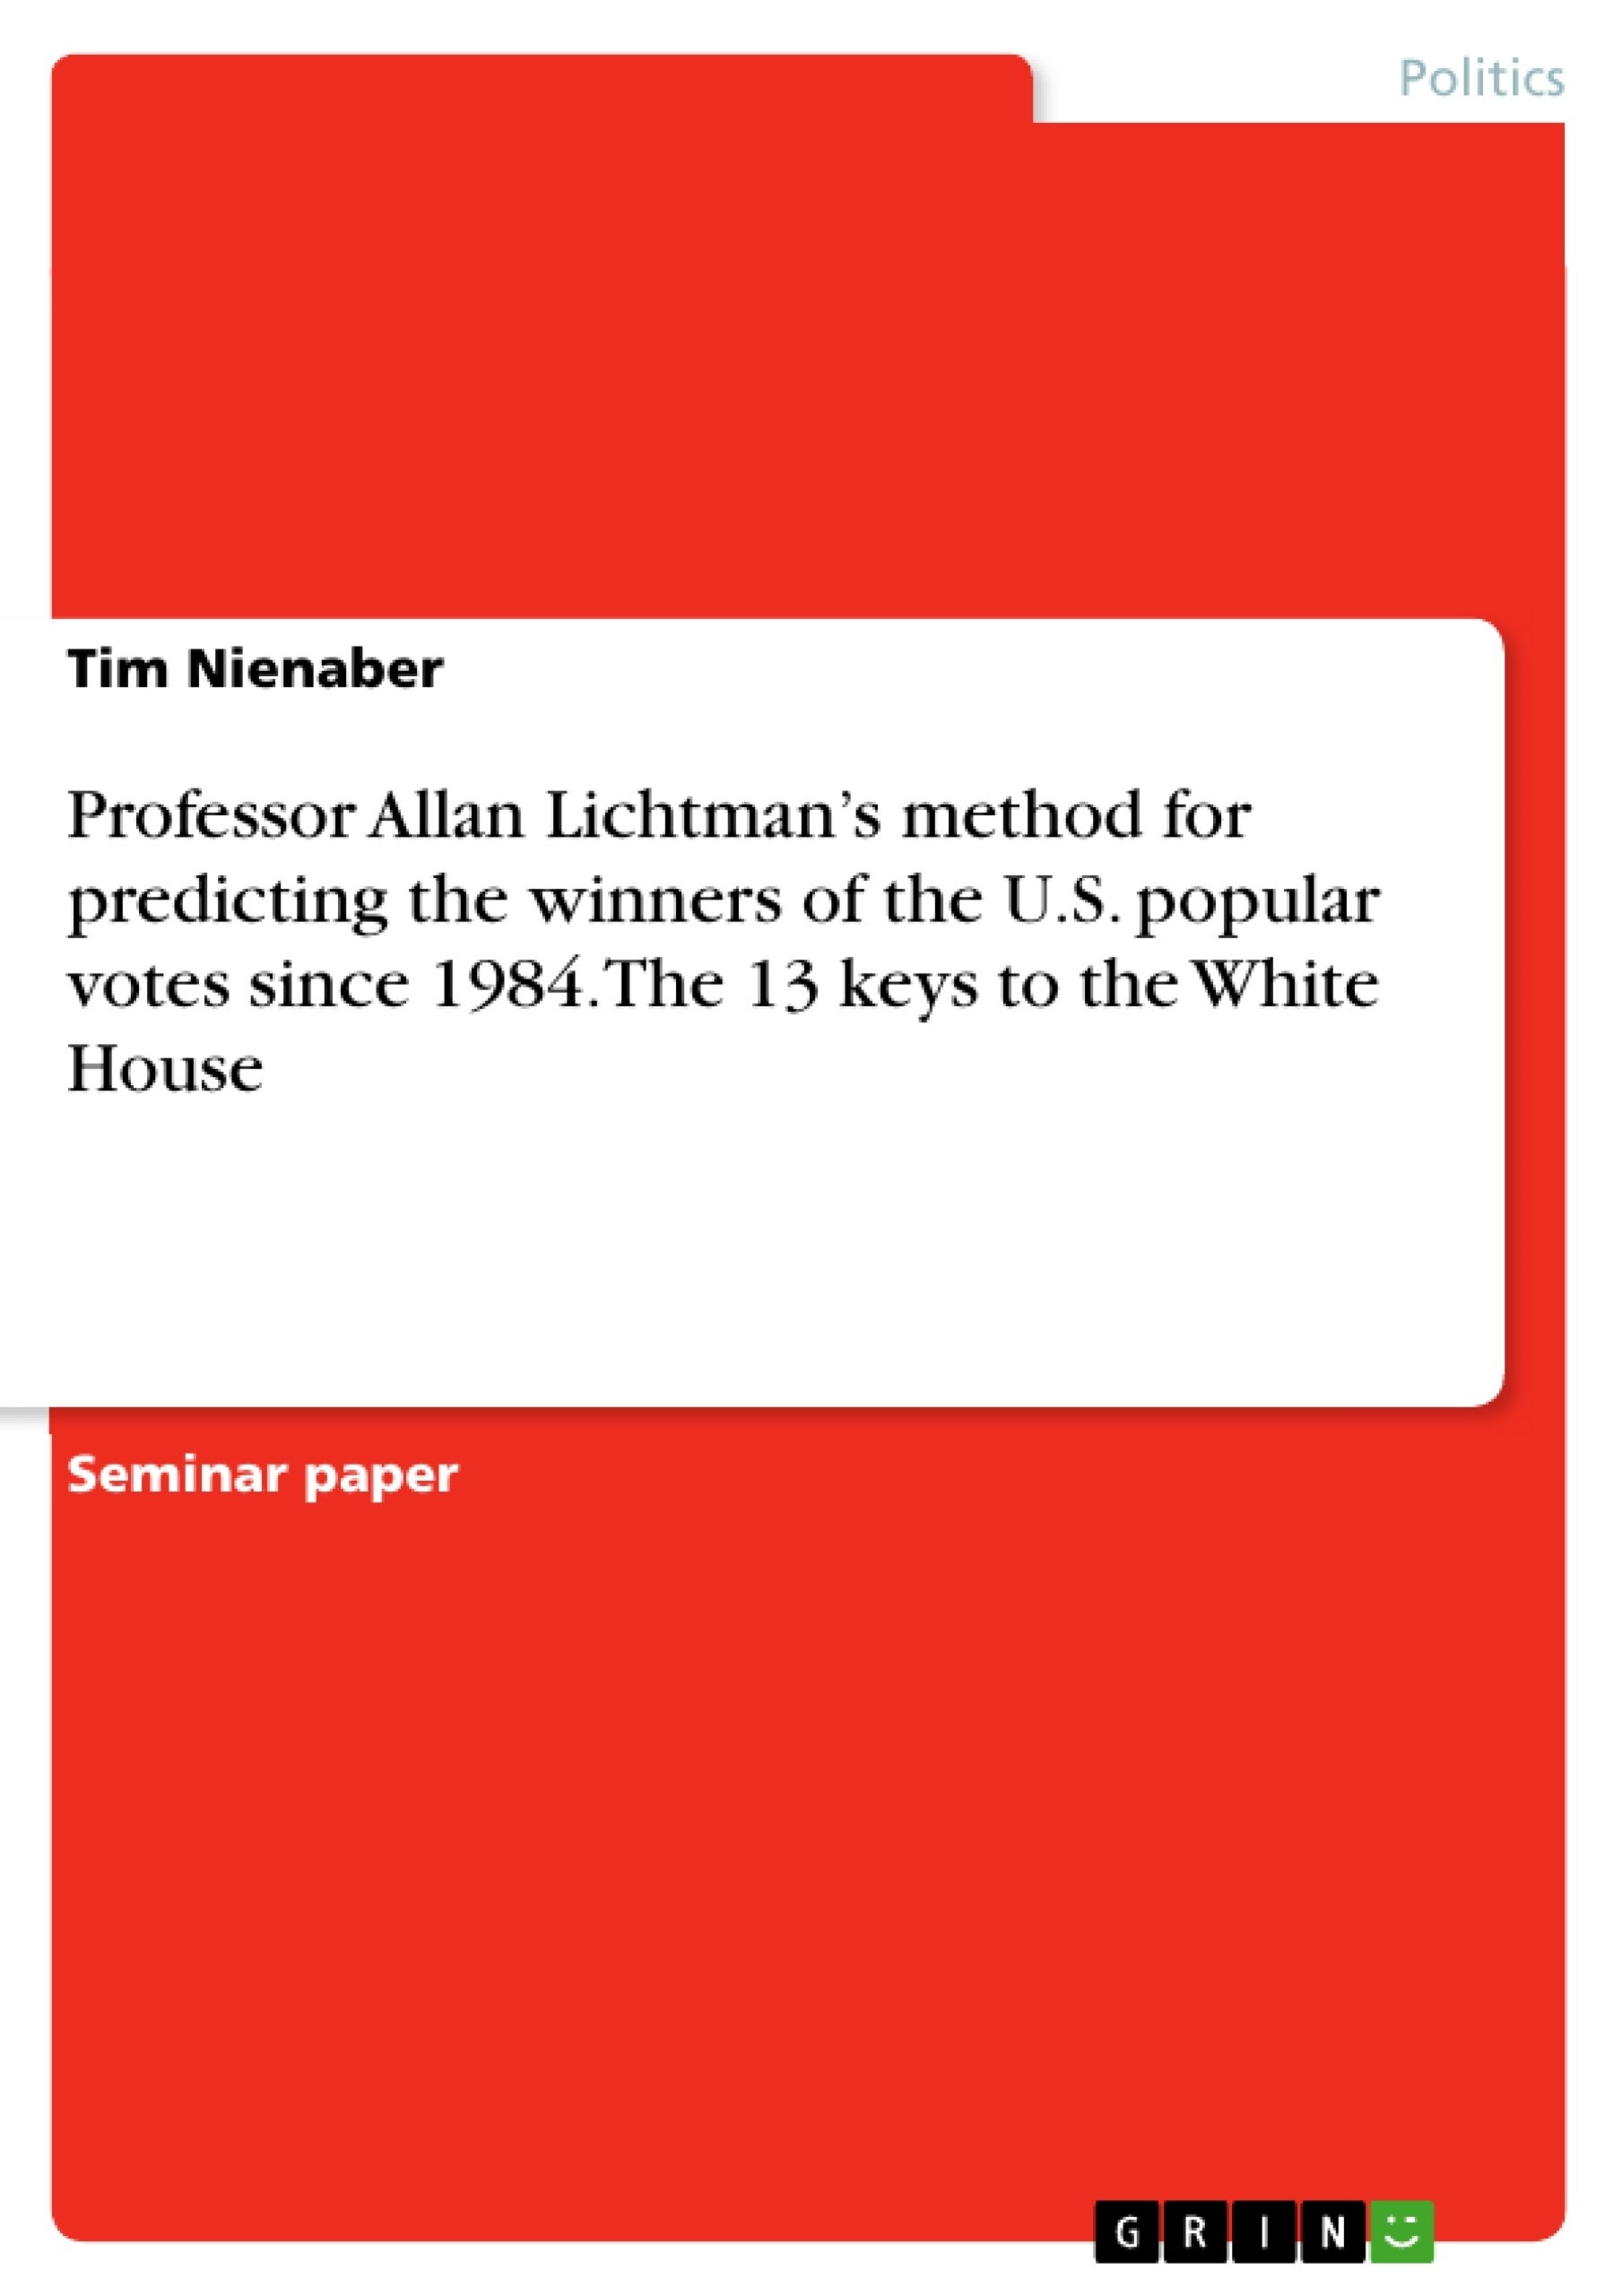 Title: Professor Allan Lichtman’s method for predicting the winners of the U.S. popular votes since 1984. The 13 keys to the White House